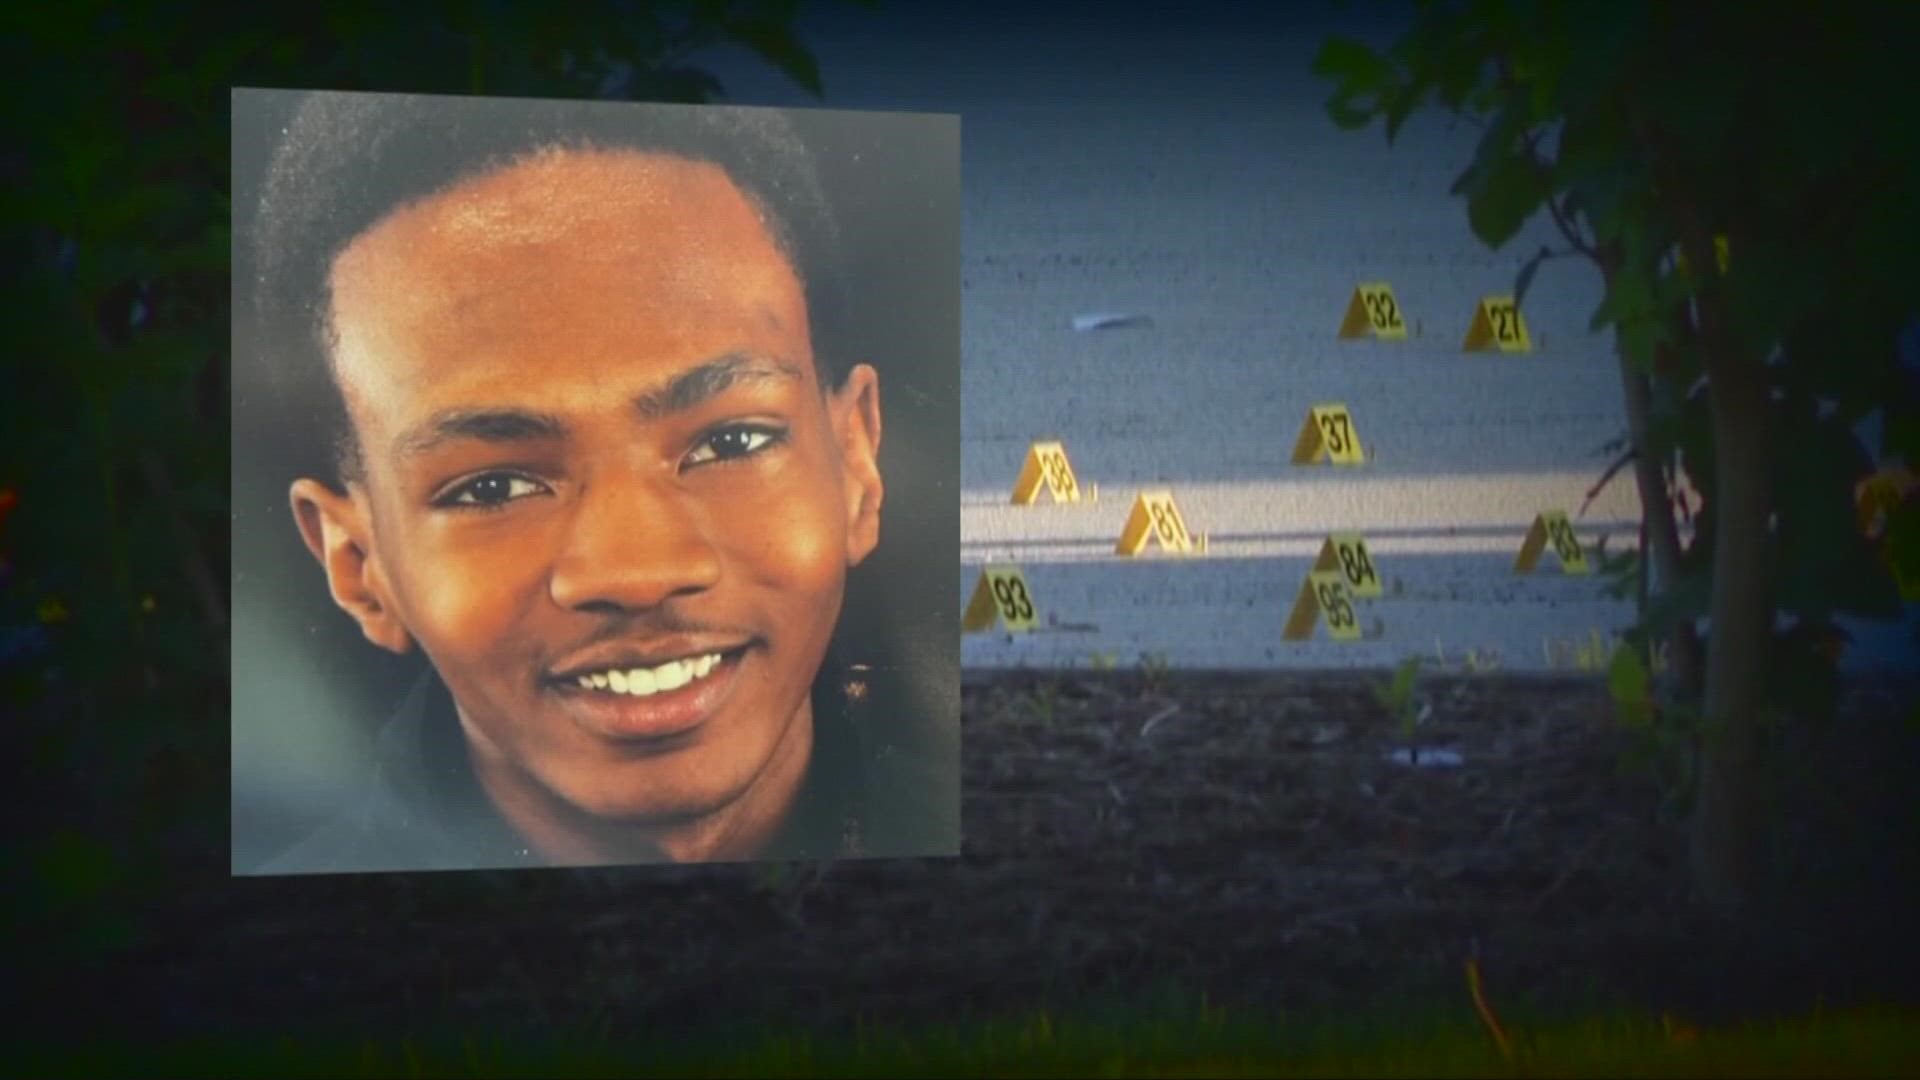 Walker died last June after being shot dozens of times by Akron police. A grand jury is expected to begin reviewing the findings in April.